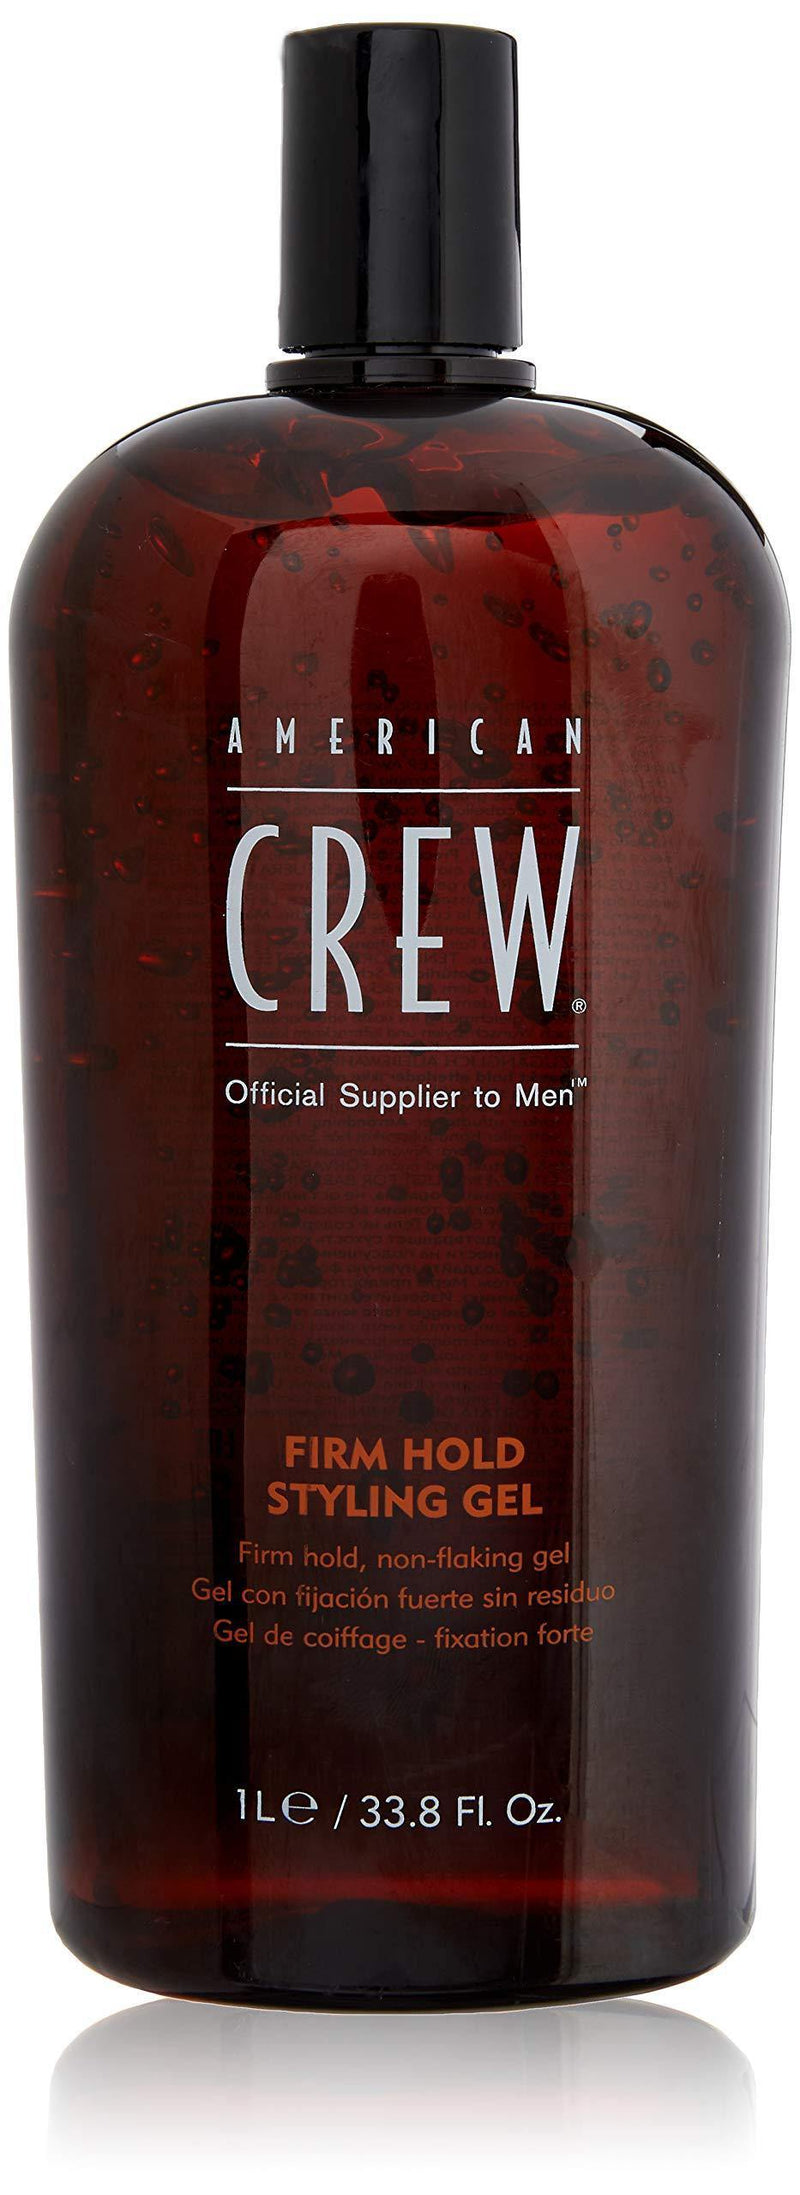 American Crew Firm Hold Styling Gel - Saber Professional